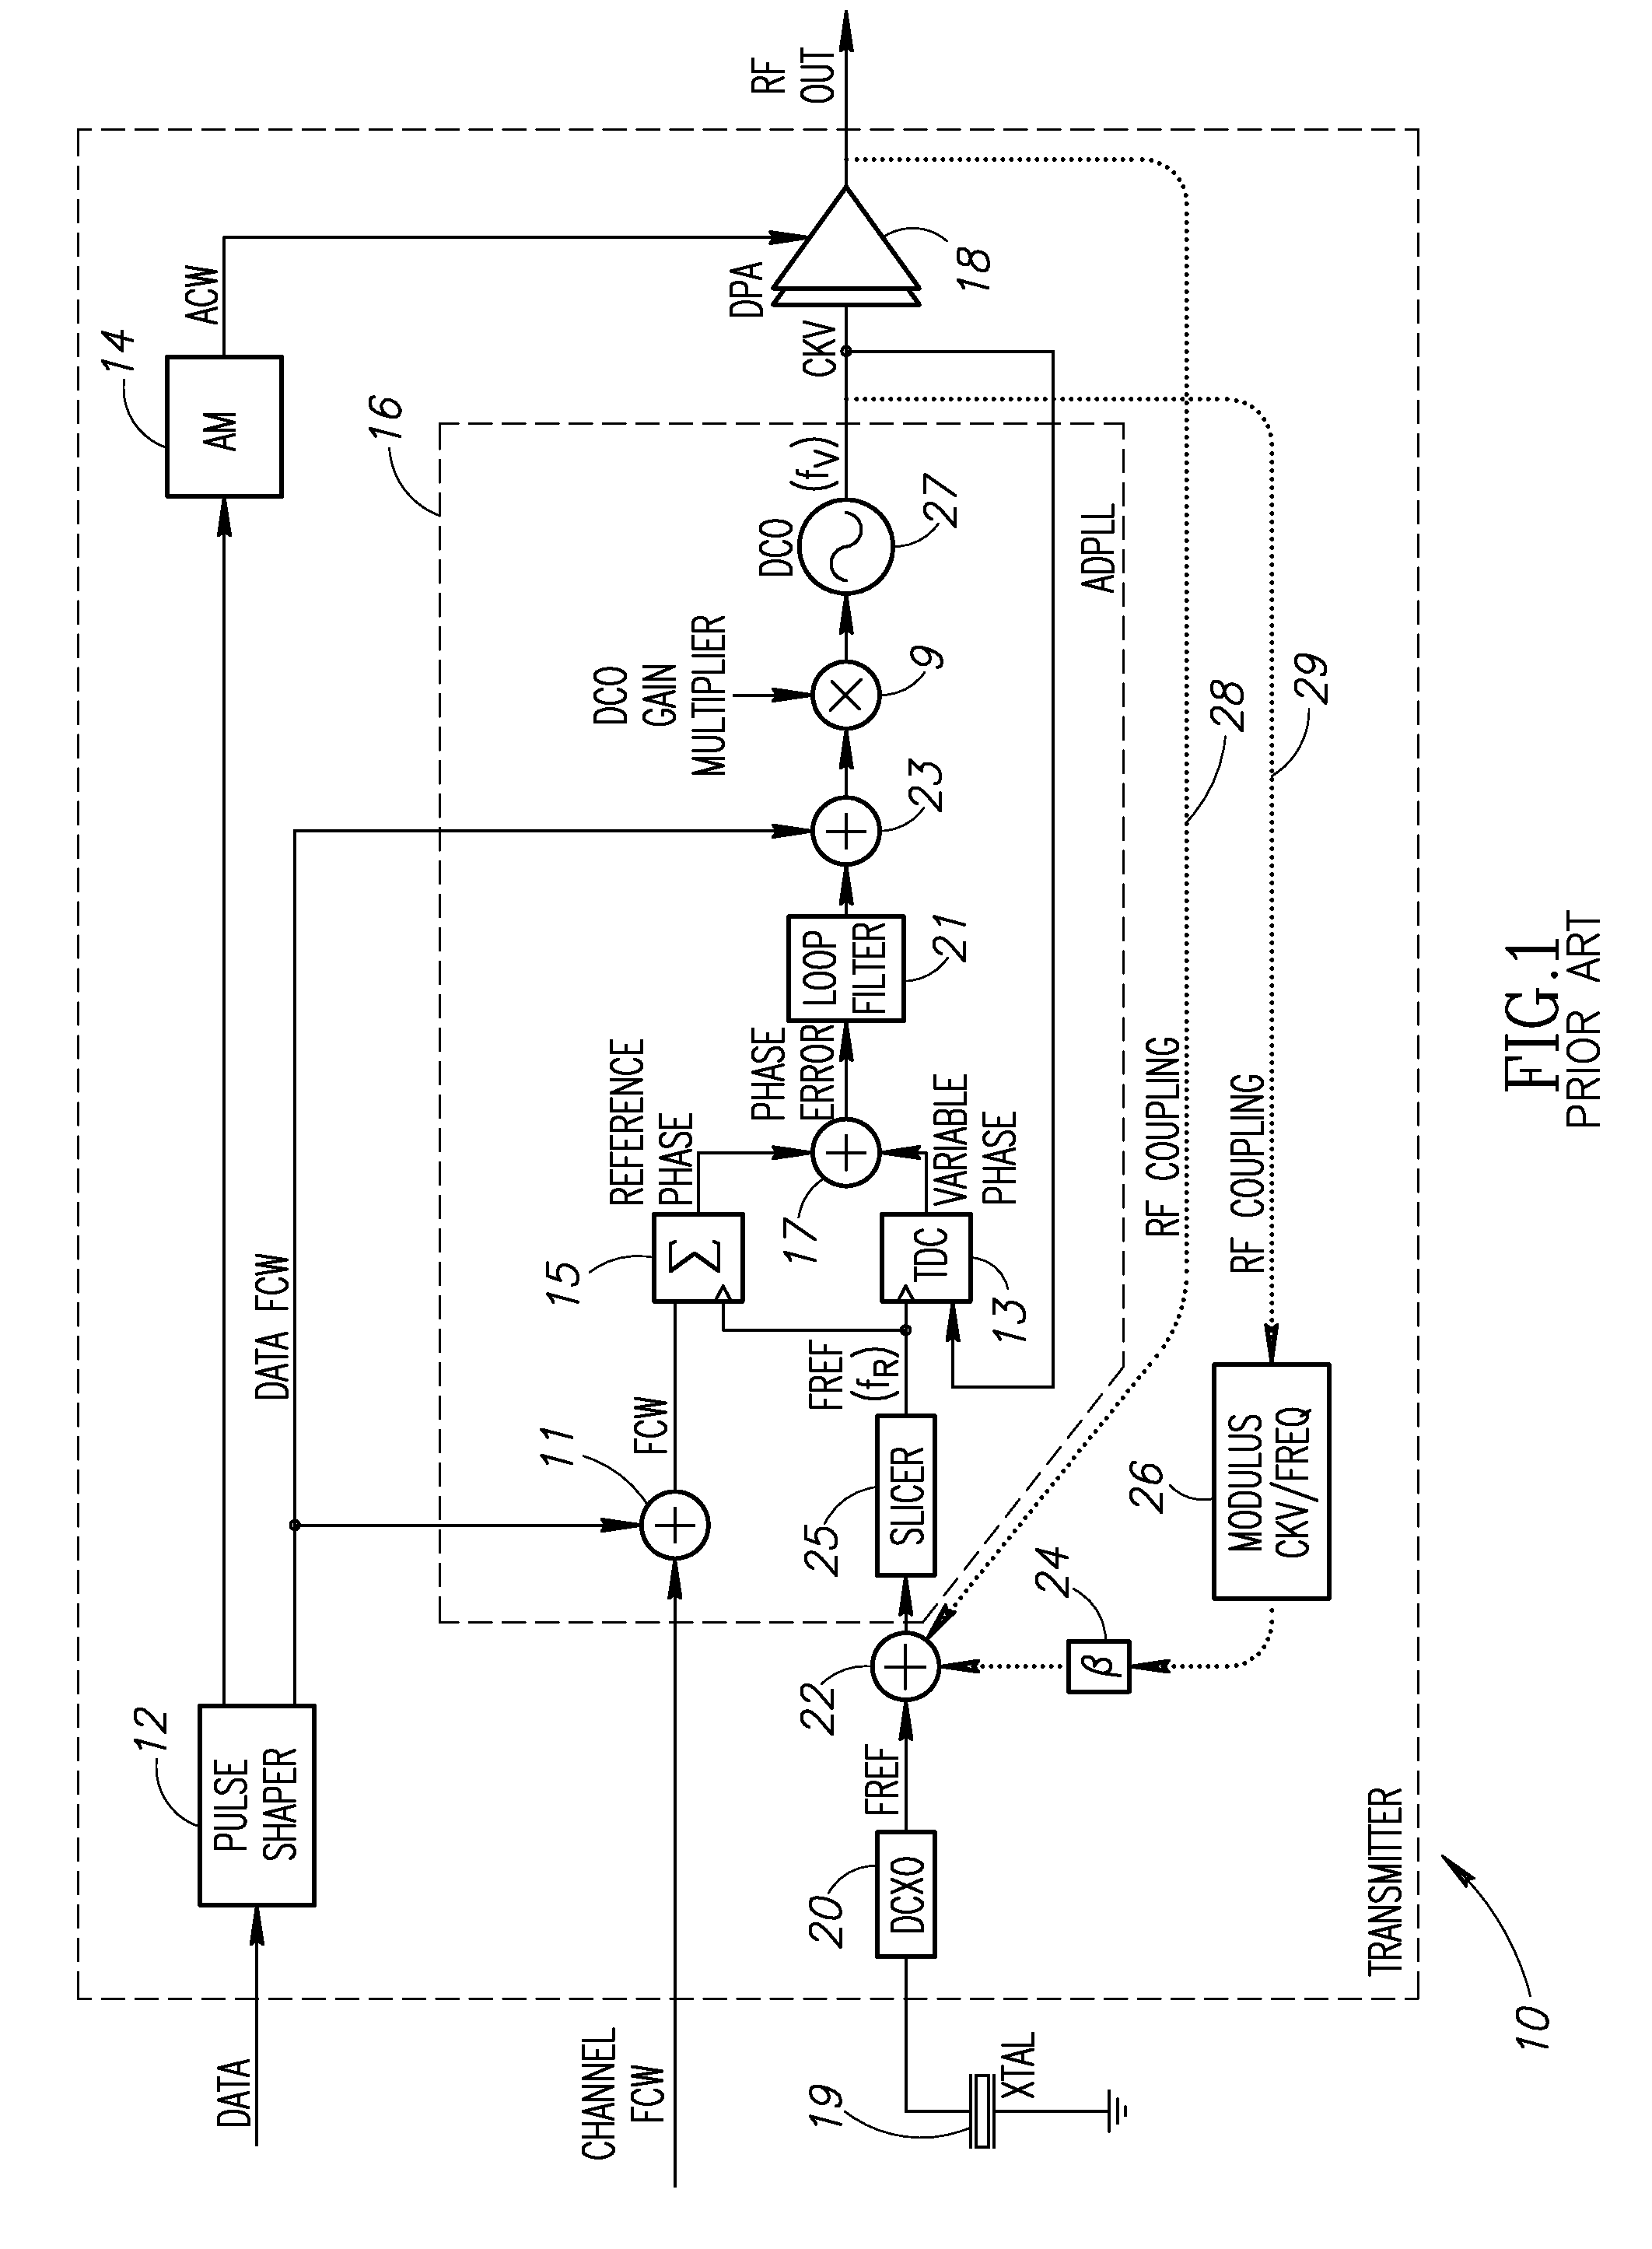 Phase alignment mechanism for minimizing the impact of integer-channel interference in a phase locked loop